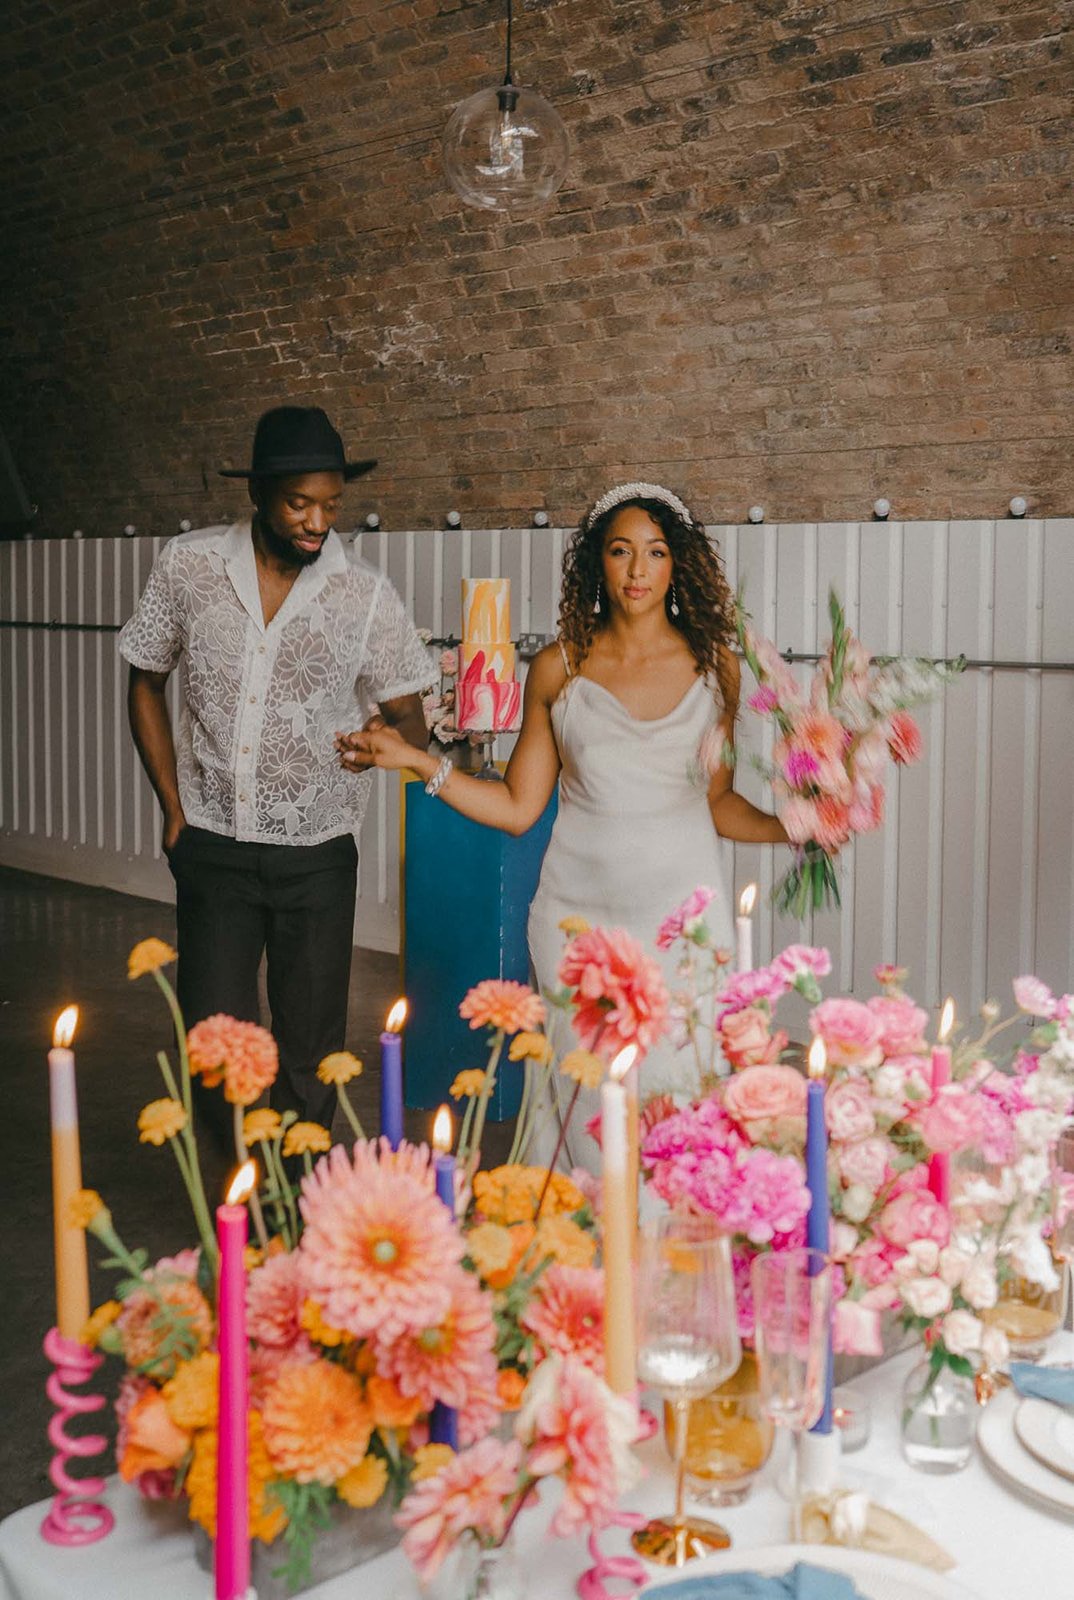  Bright florals and table candles adorn a modern wedding table as the bride and groom are walking behind it. The newlyweds have their images brought to life by wedding content creator who captures all the behind the scenes moments.  Photo by: Josephi